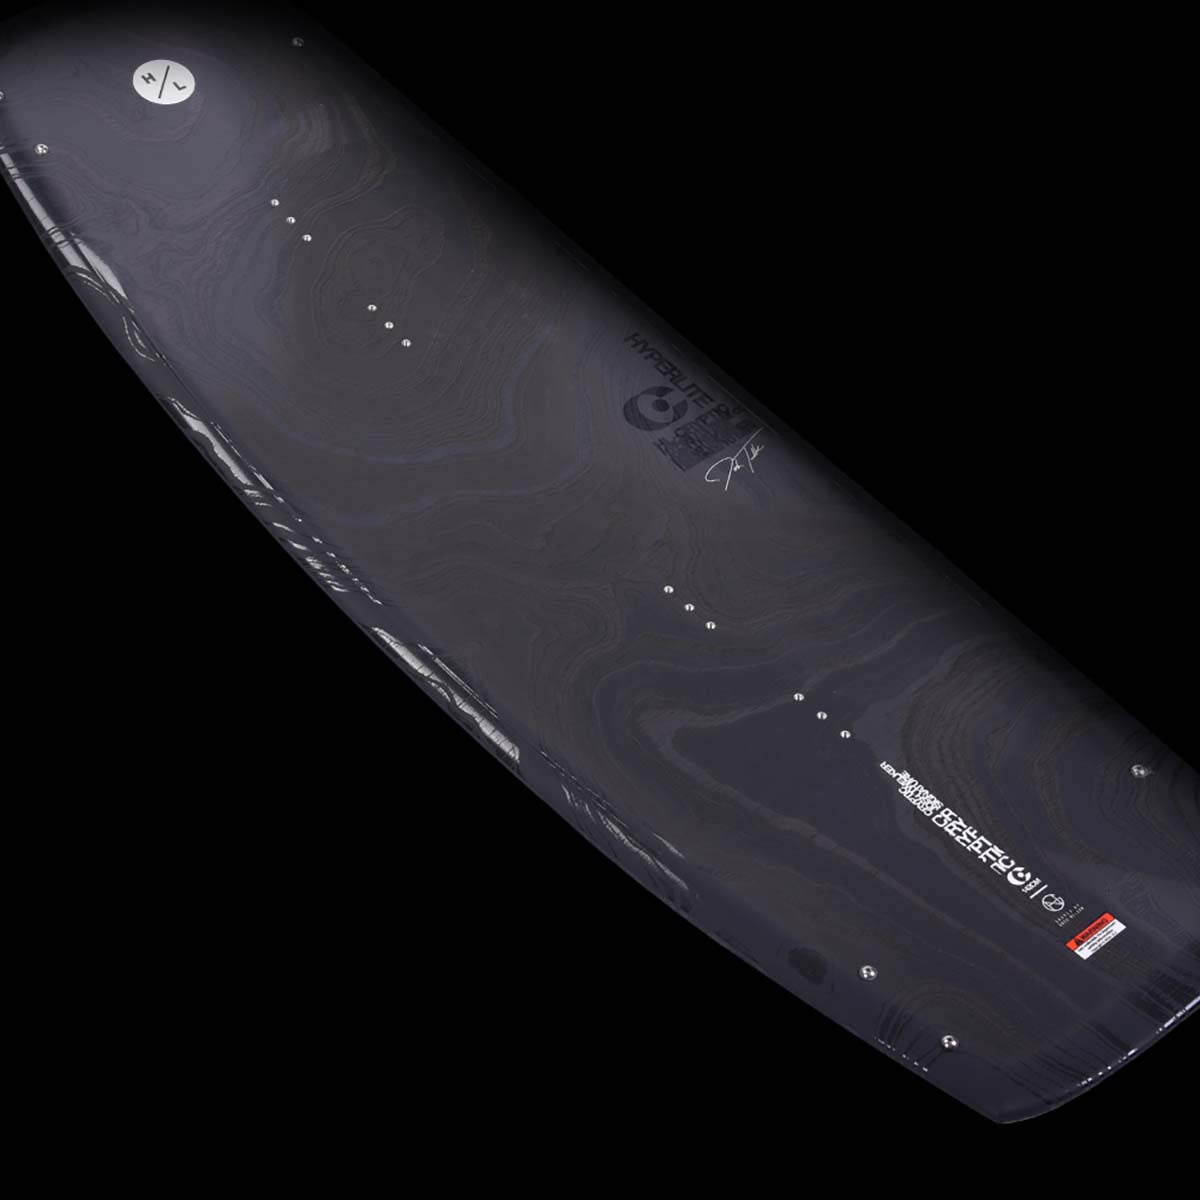 Hyperlite Cryptic Wakeboard 2024 - BoardCo